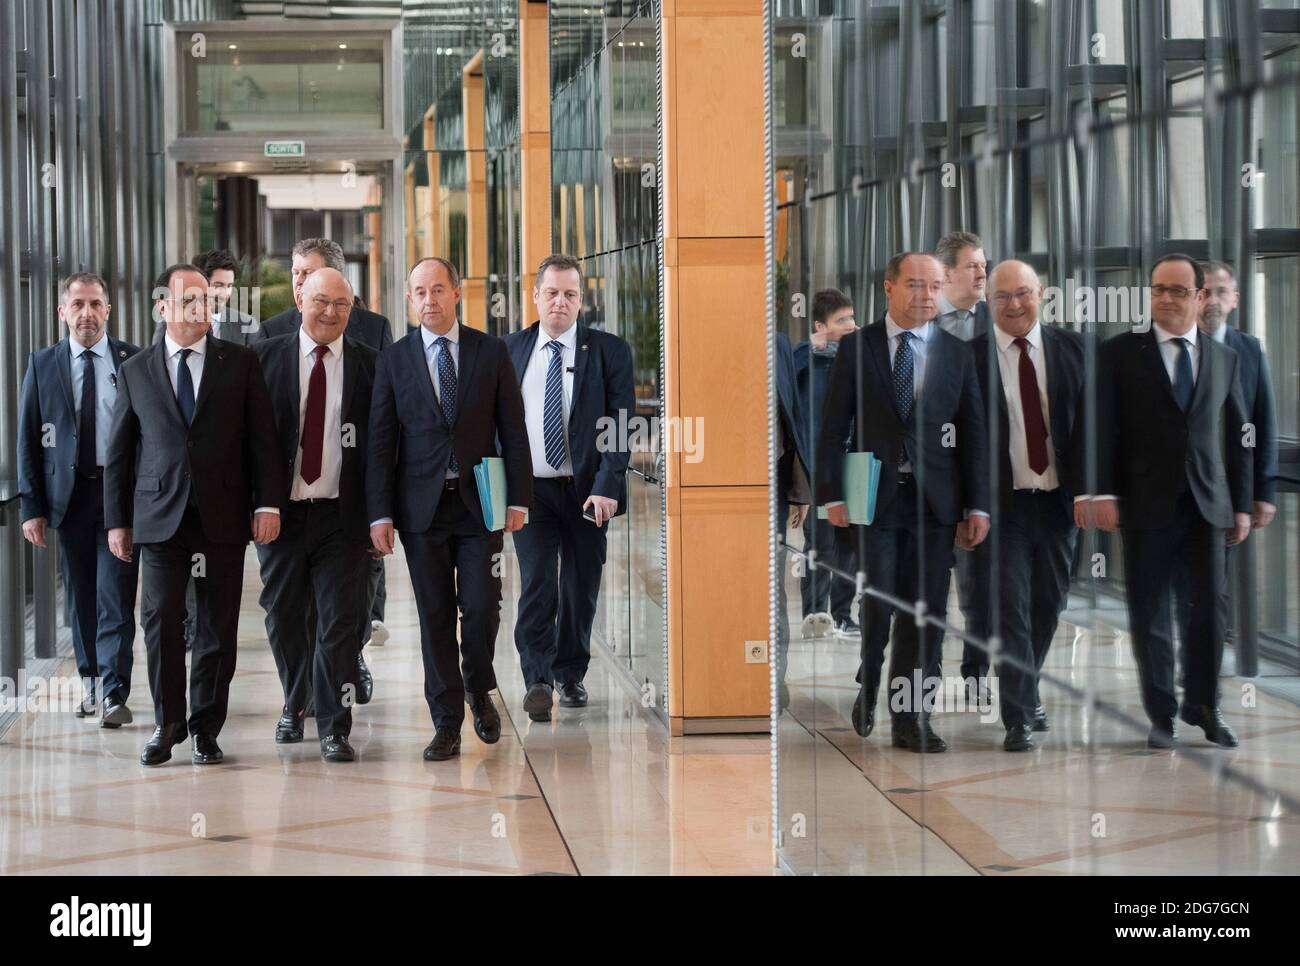 French President Francois Hollande, Minister of Justice Jean-Jacques Urvoas, Minister of the Economy and Finance Michel Sapin and AFA director Charles Duchaine arriving for the inauguration of the French Anti-corruption Agency (AFA), at the Ecoomy and Finance Ministry's headquarters, in Paris, France on March 23, 2017. Photo by Eliot Blondet/ABACAPRESS.COM Stock Photo